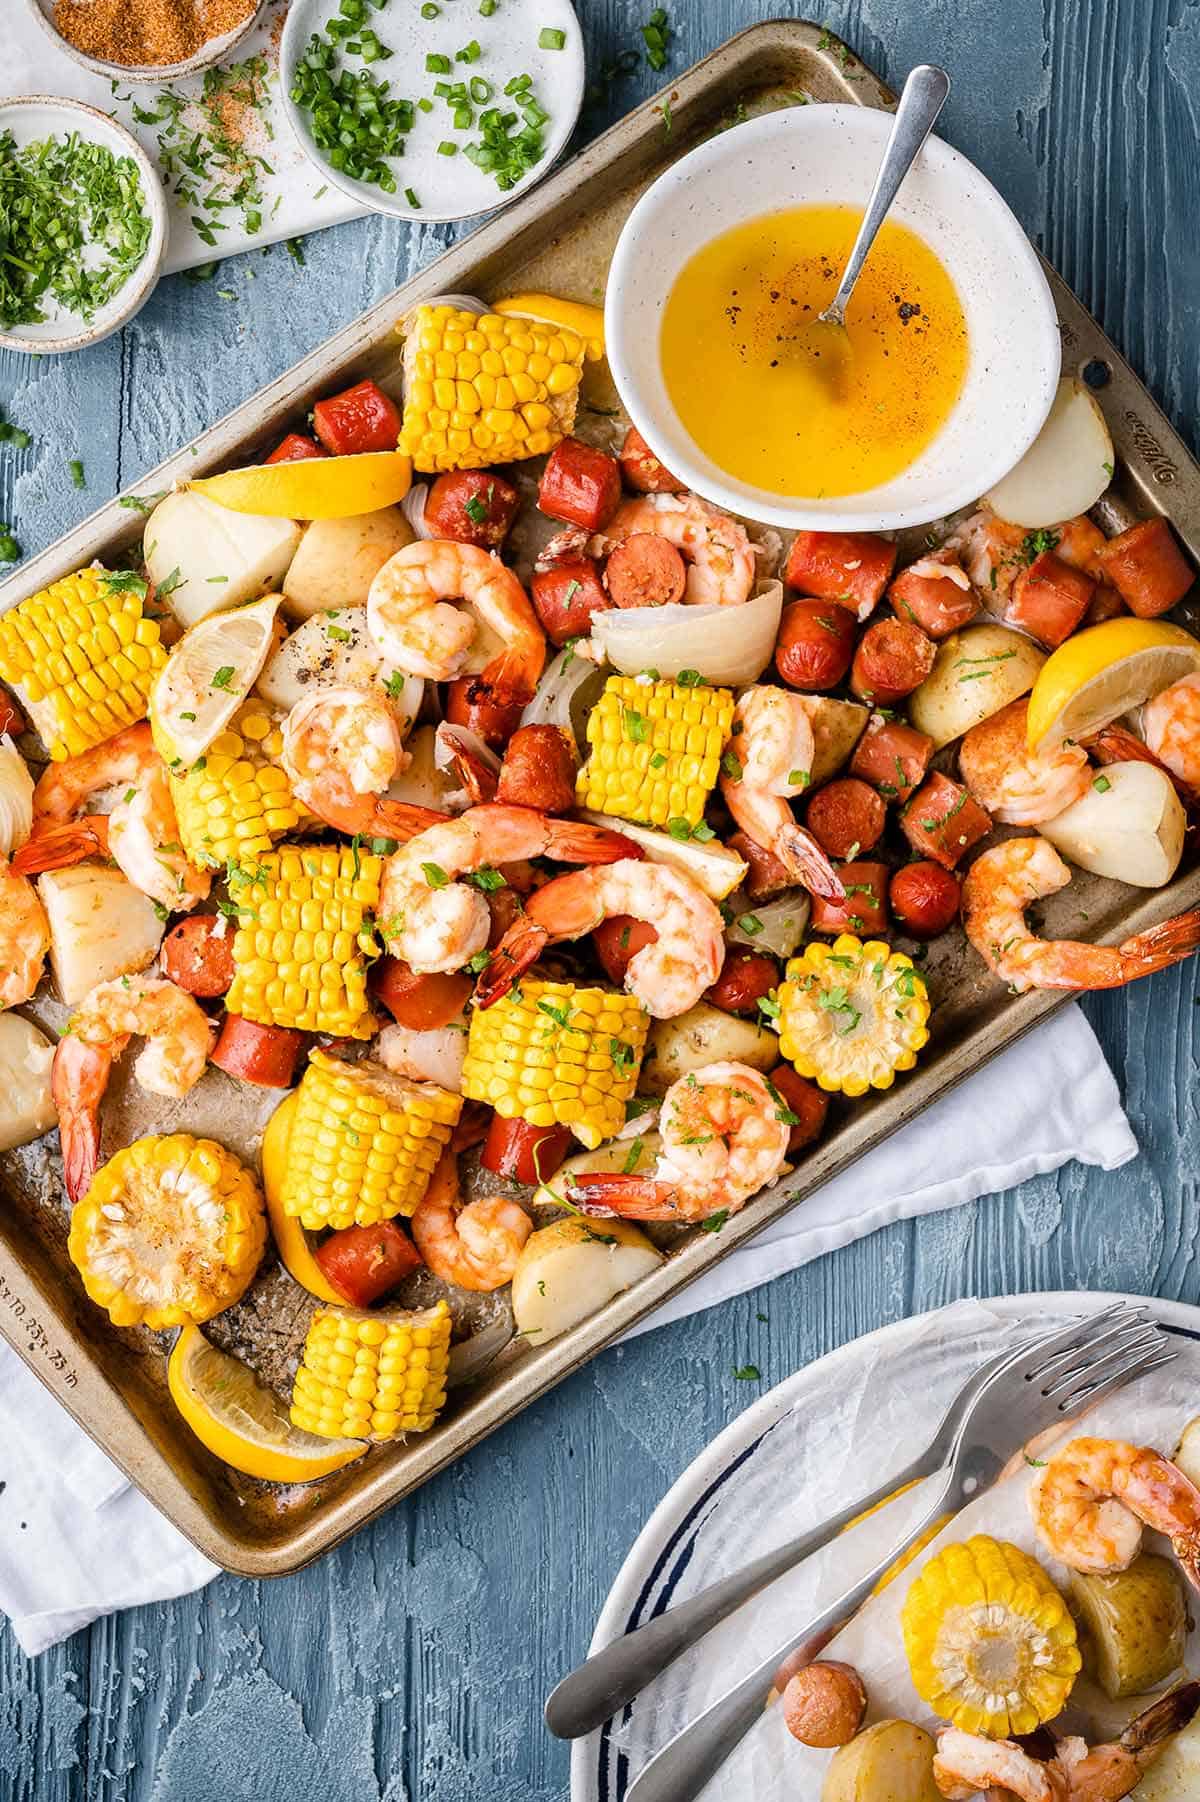 Shrimp Boil smothered in garlic butter and Creole seasoning made easy in the oven. Ready in 30 minutes!